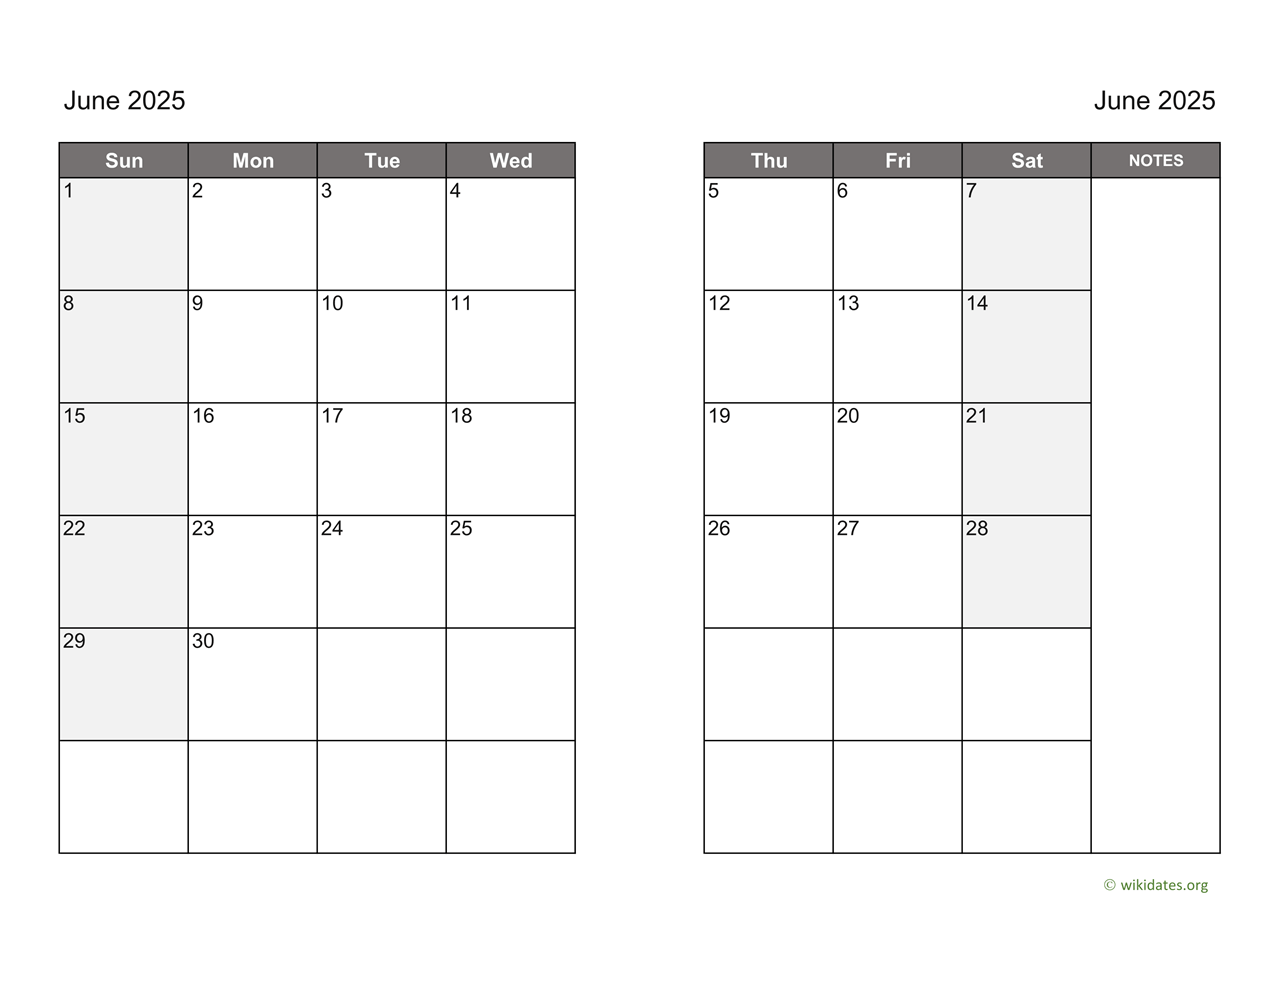 June 2025 Calendar on two pages WikiDates org